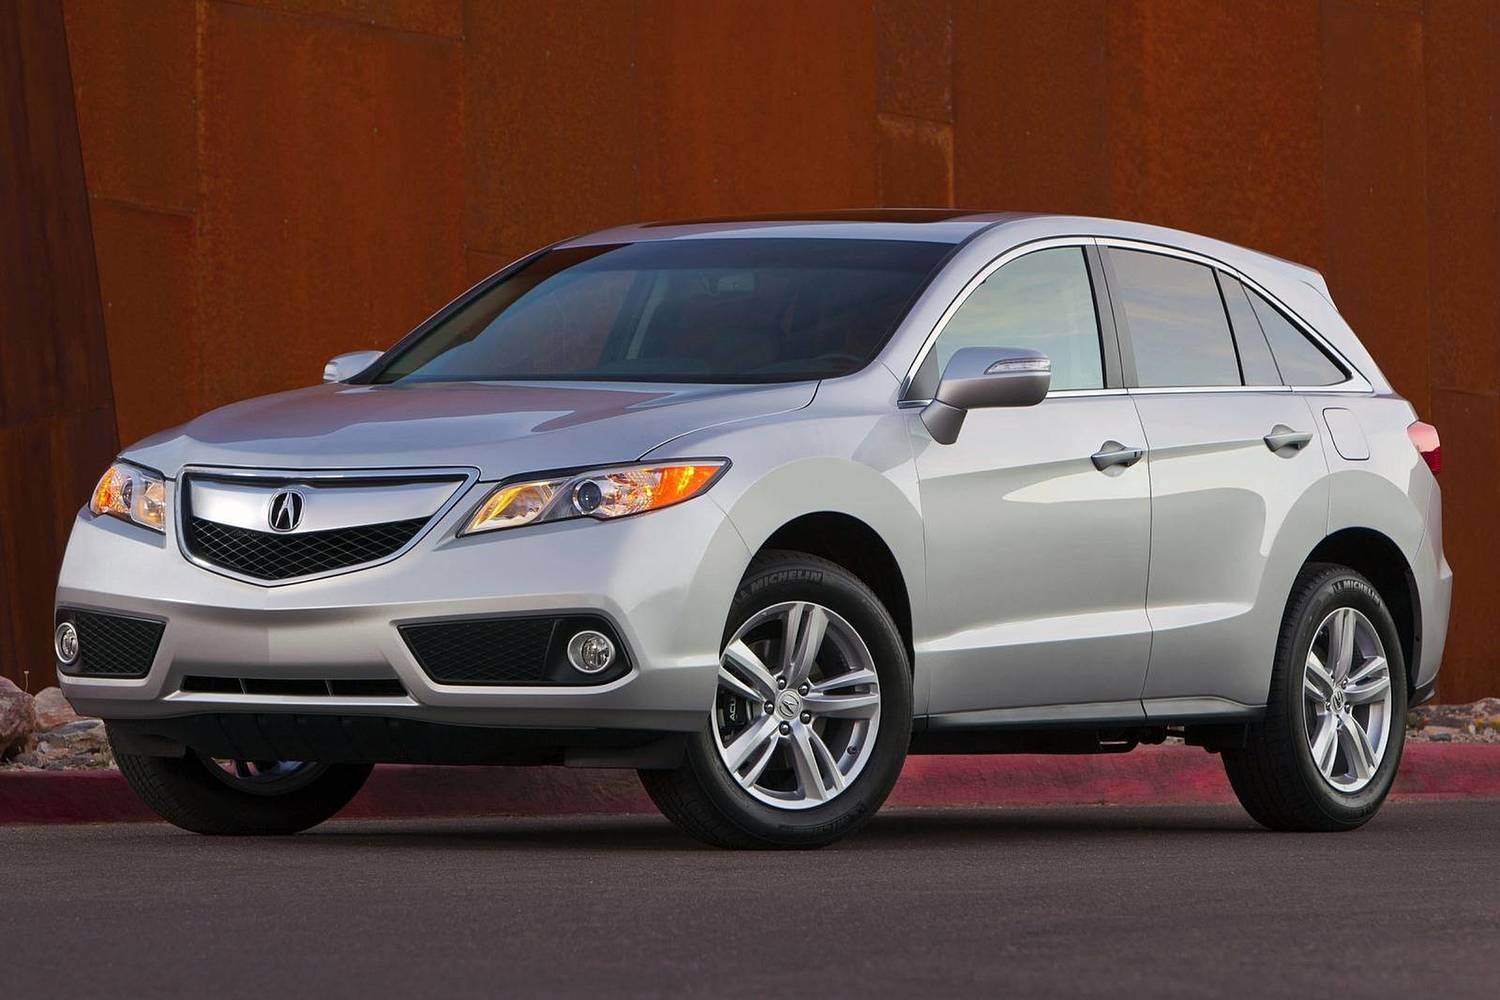 Acura RDX 4dr SUV Exterior (2014 model year shown)